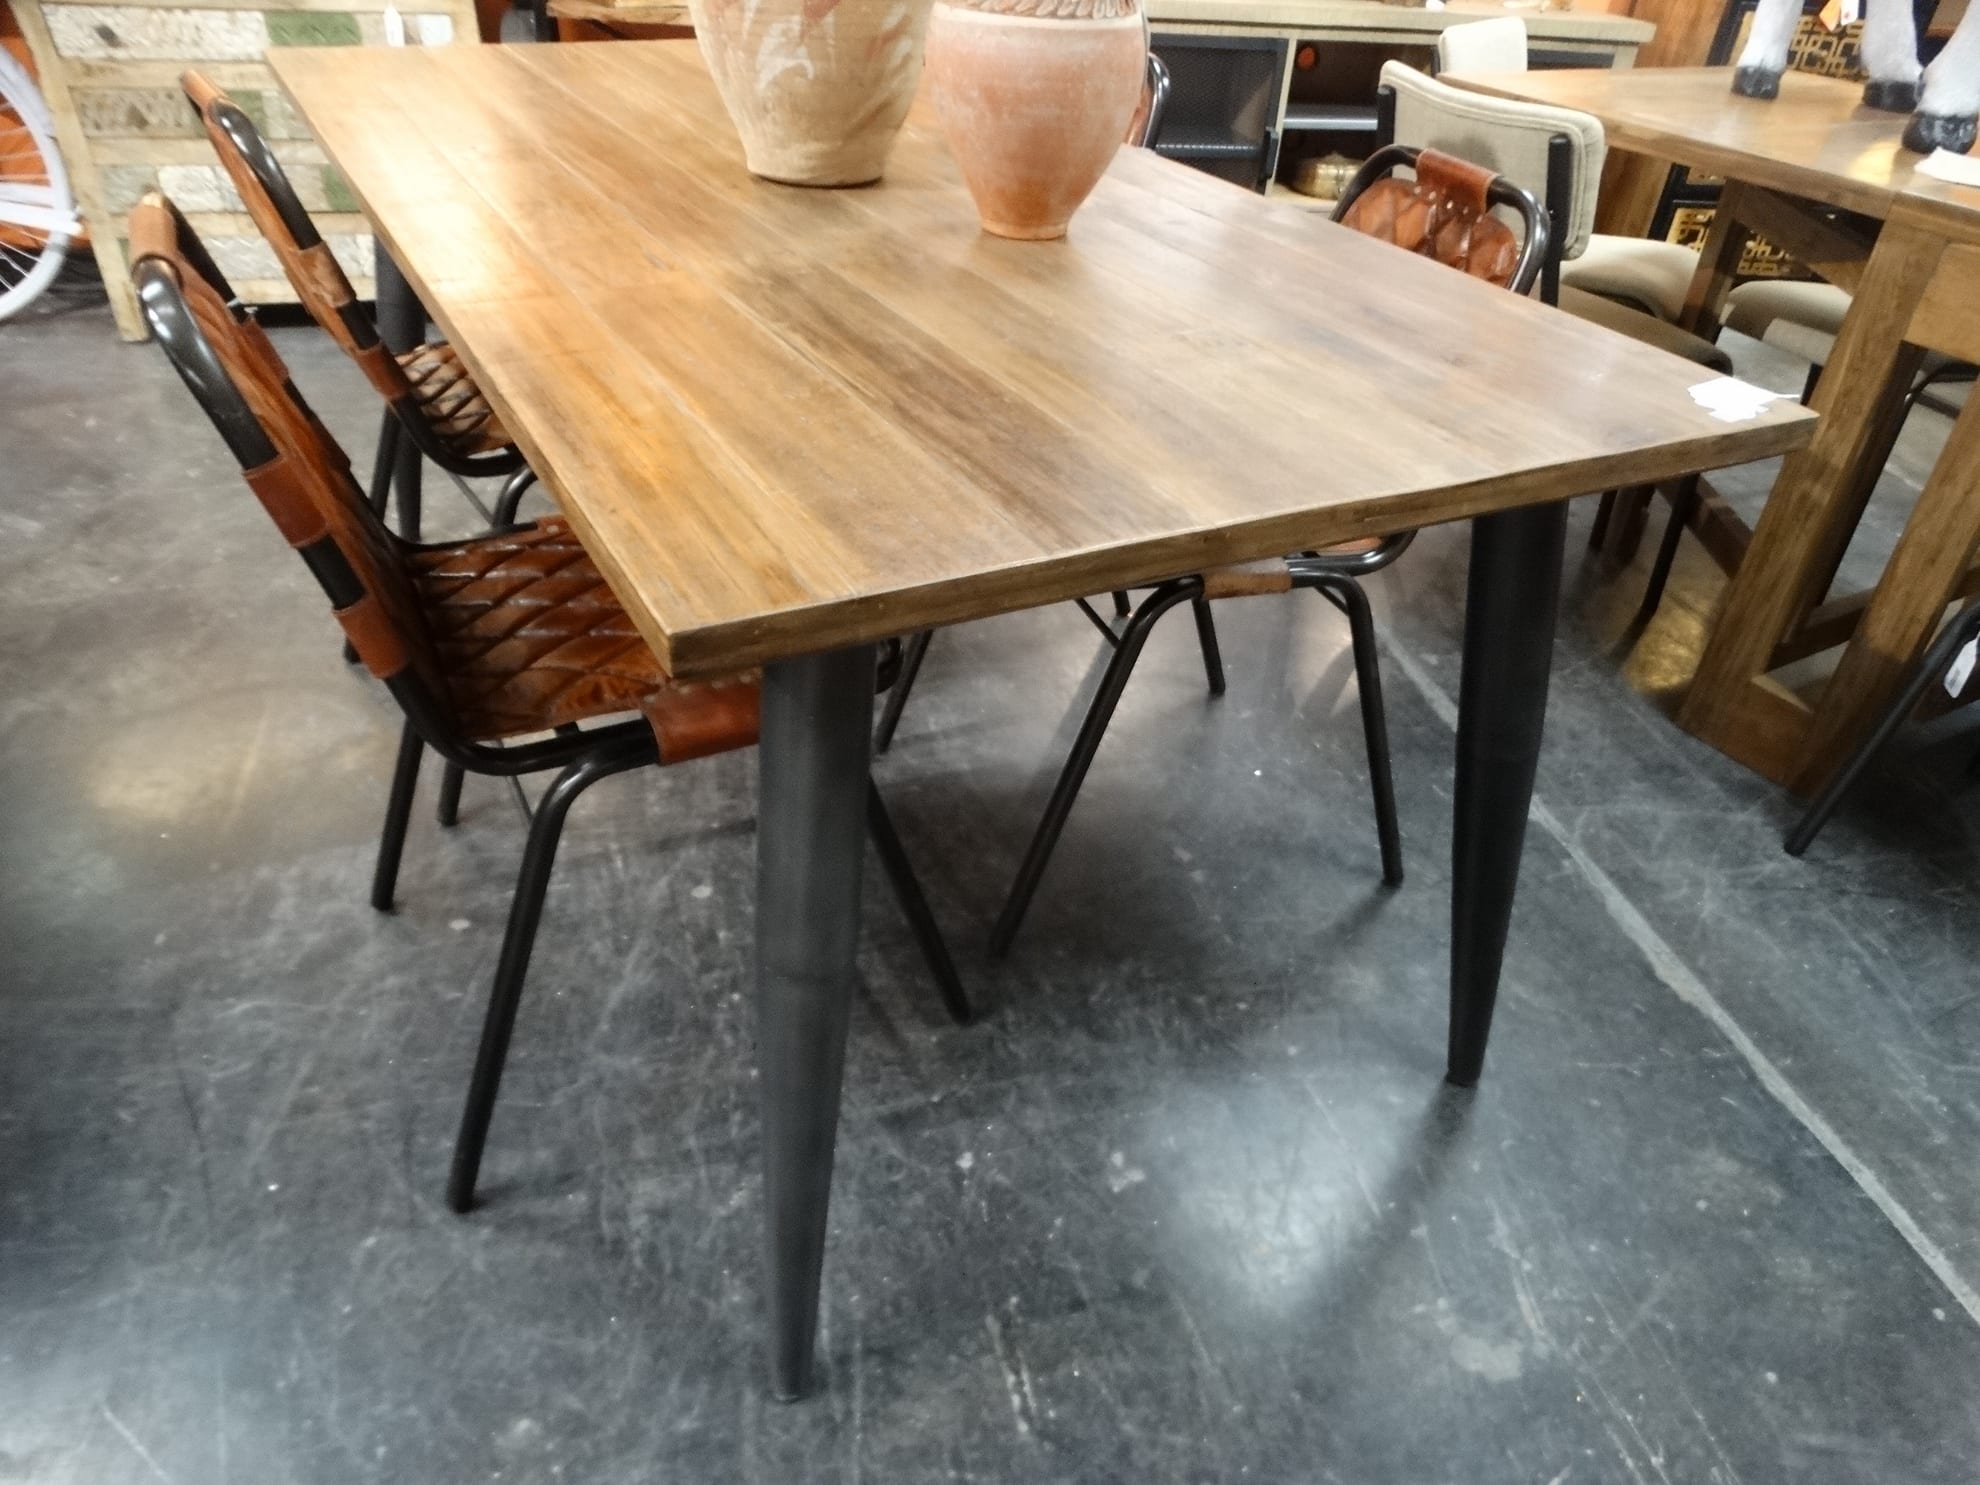 Dining Table Pencil Leg Wood Top Table - Rare Finds Warehouse